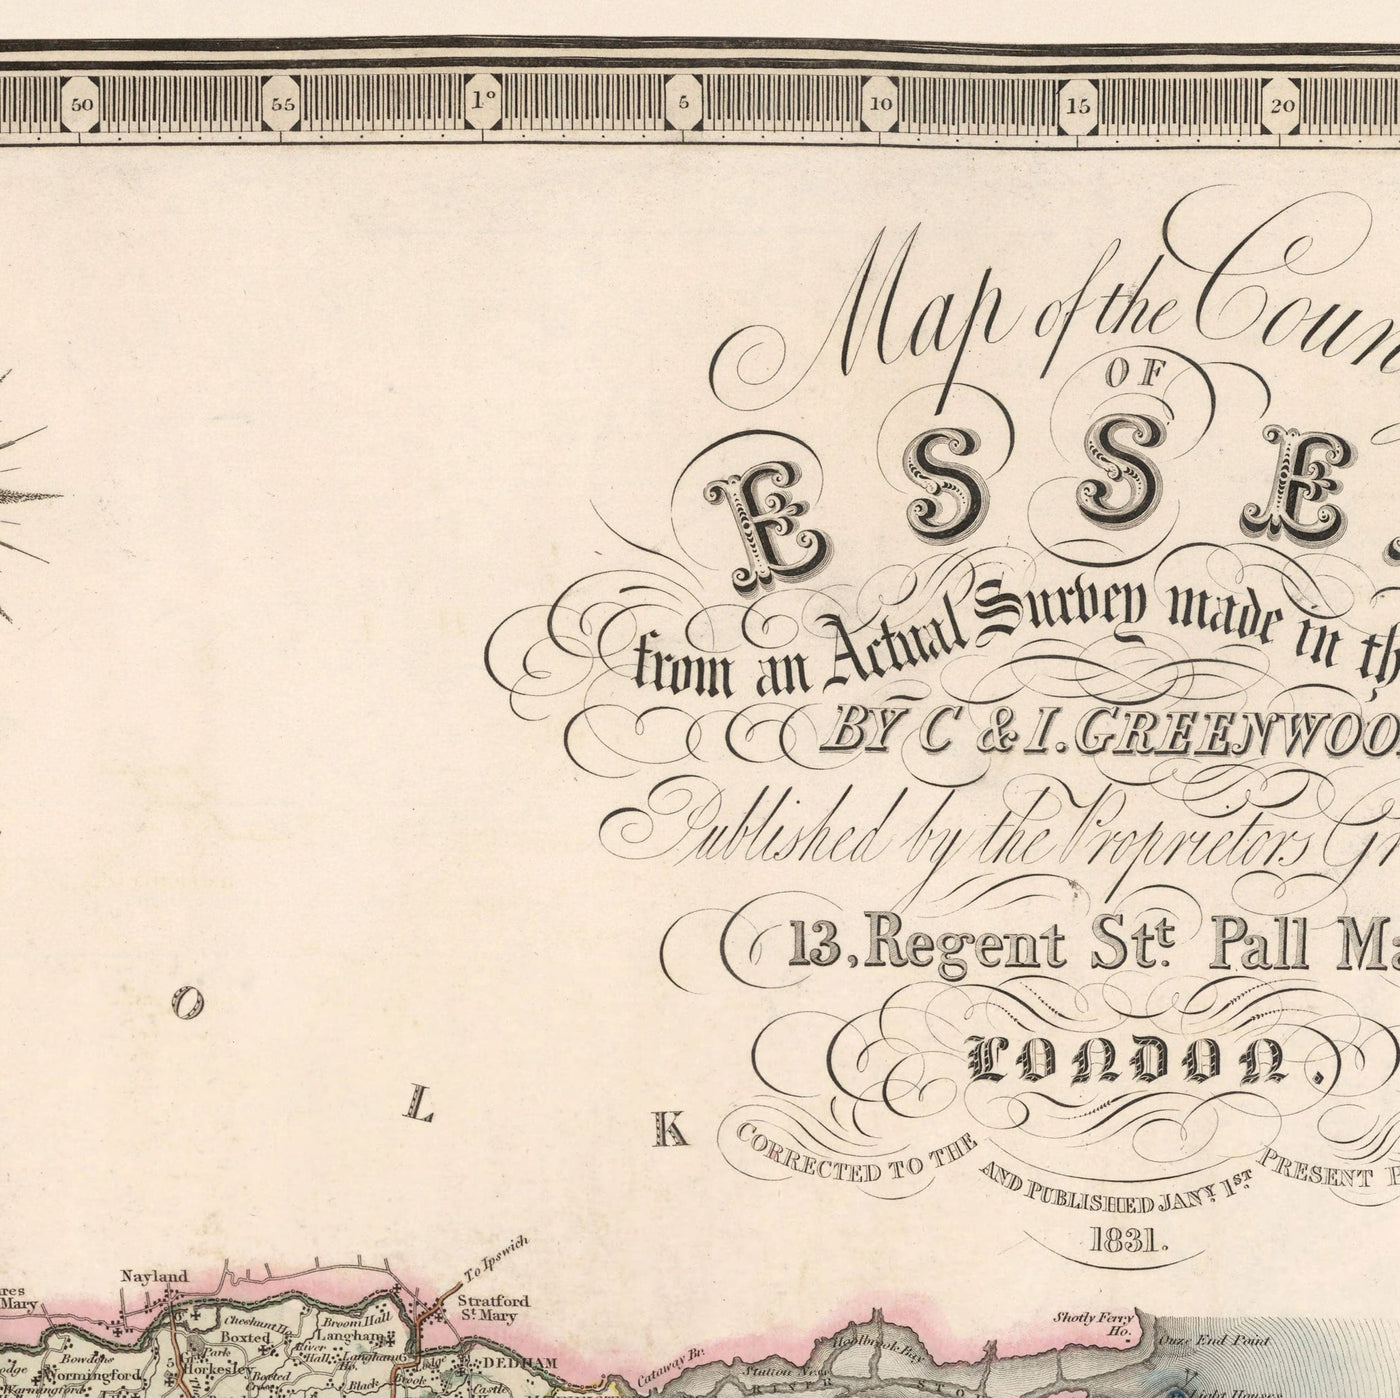 Old Map of Essex, 1831 by Greenwood & Co. - Southend, Colchester, Chelmsford, Romford, Dagenham, Brentwood, Basildon